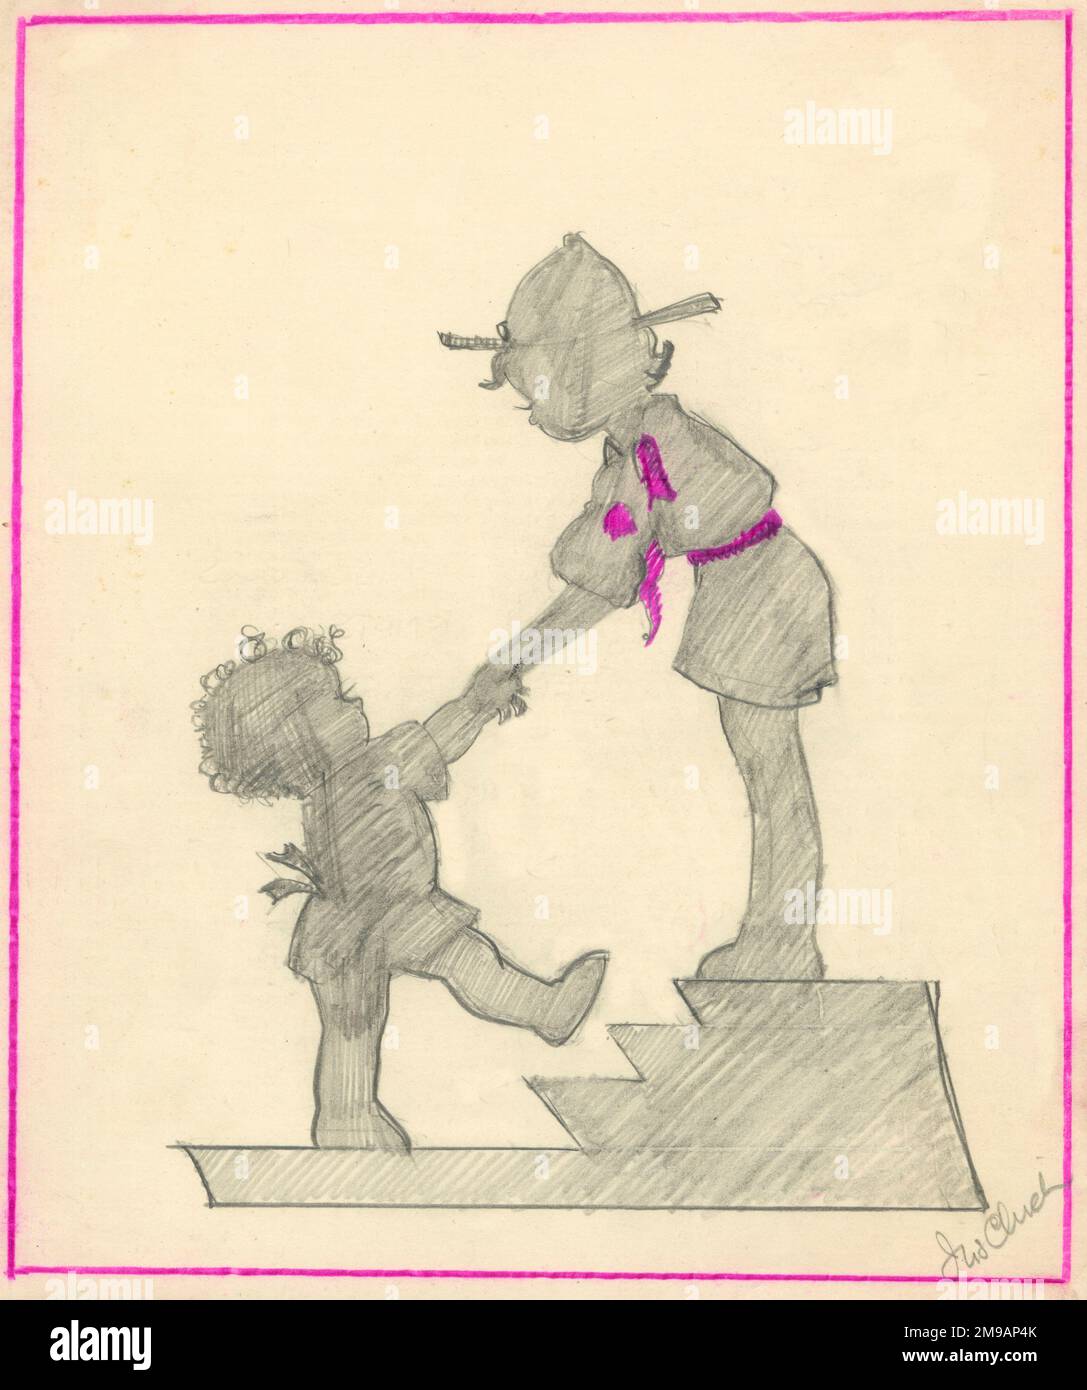 Original Artwork - A little boy scout helping a toddler up some steps. Stock Photo